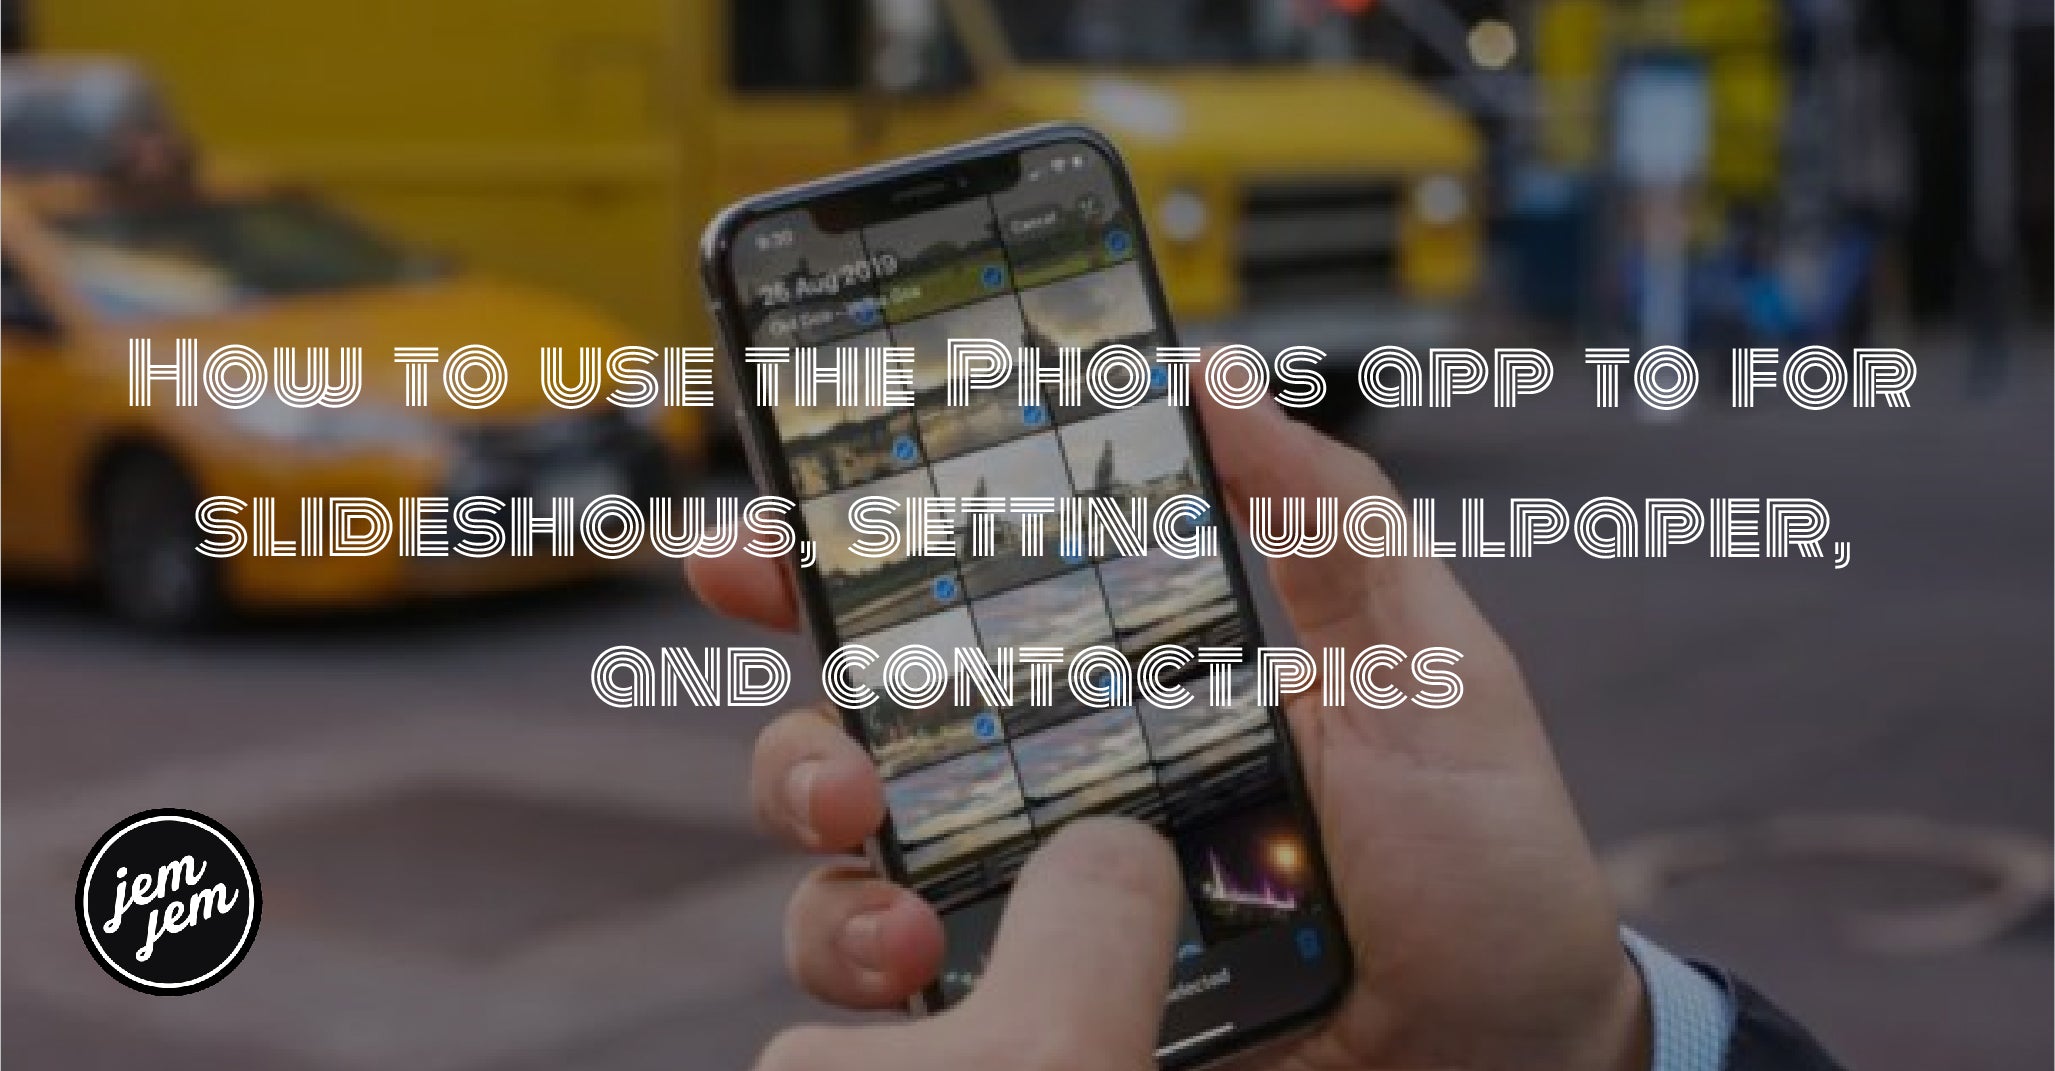 How to use the Photos app to for slideshows, setting wallpaper, and contact pics